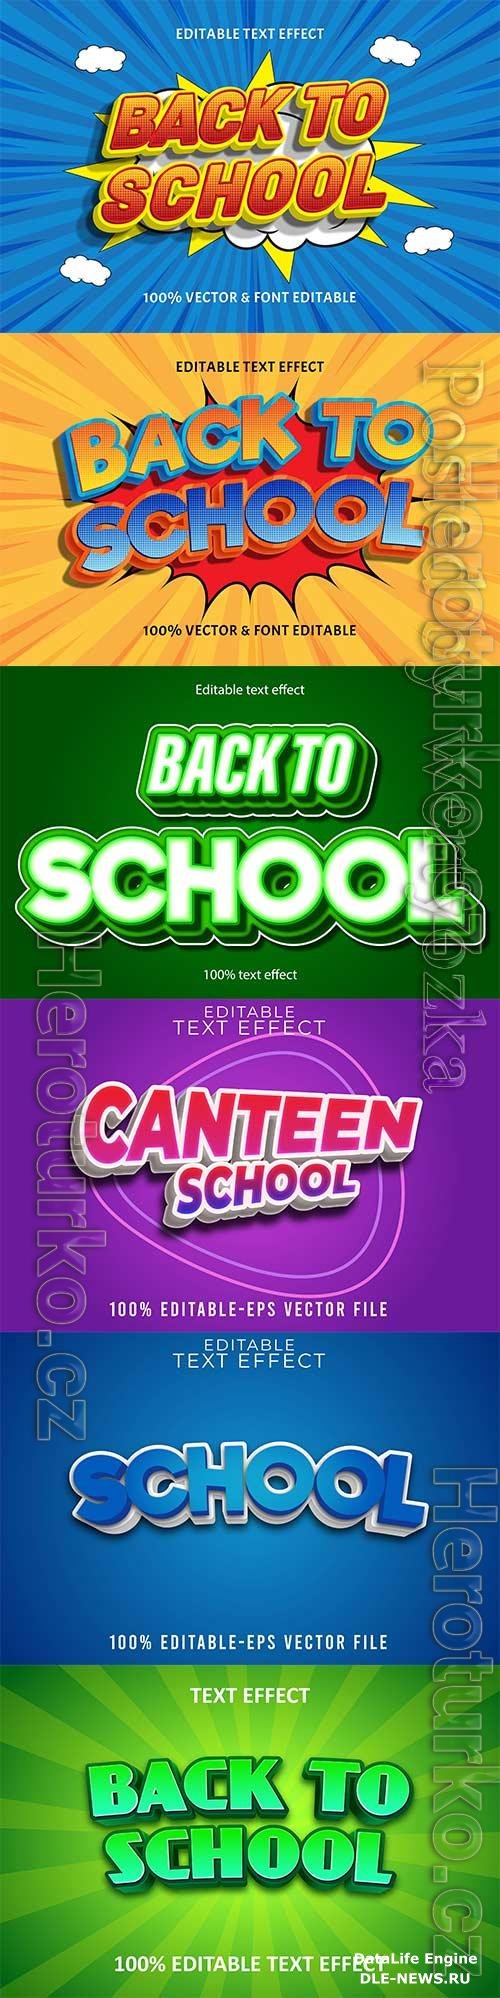 Back to school editable text effect vol 14